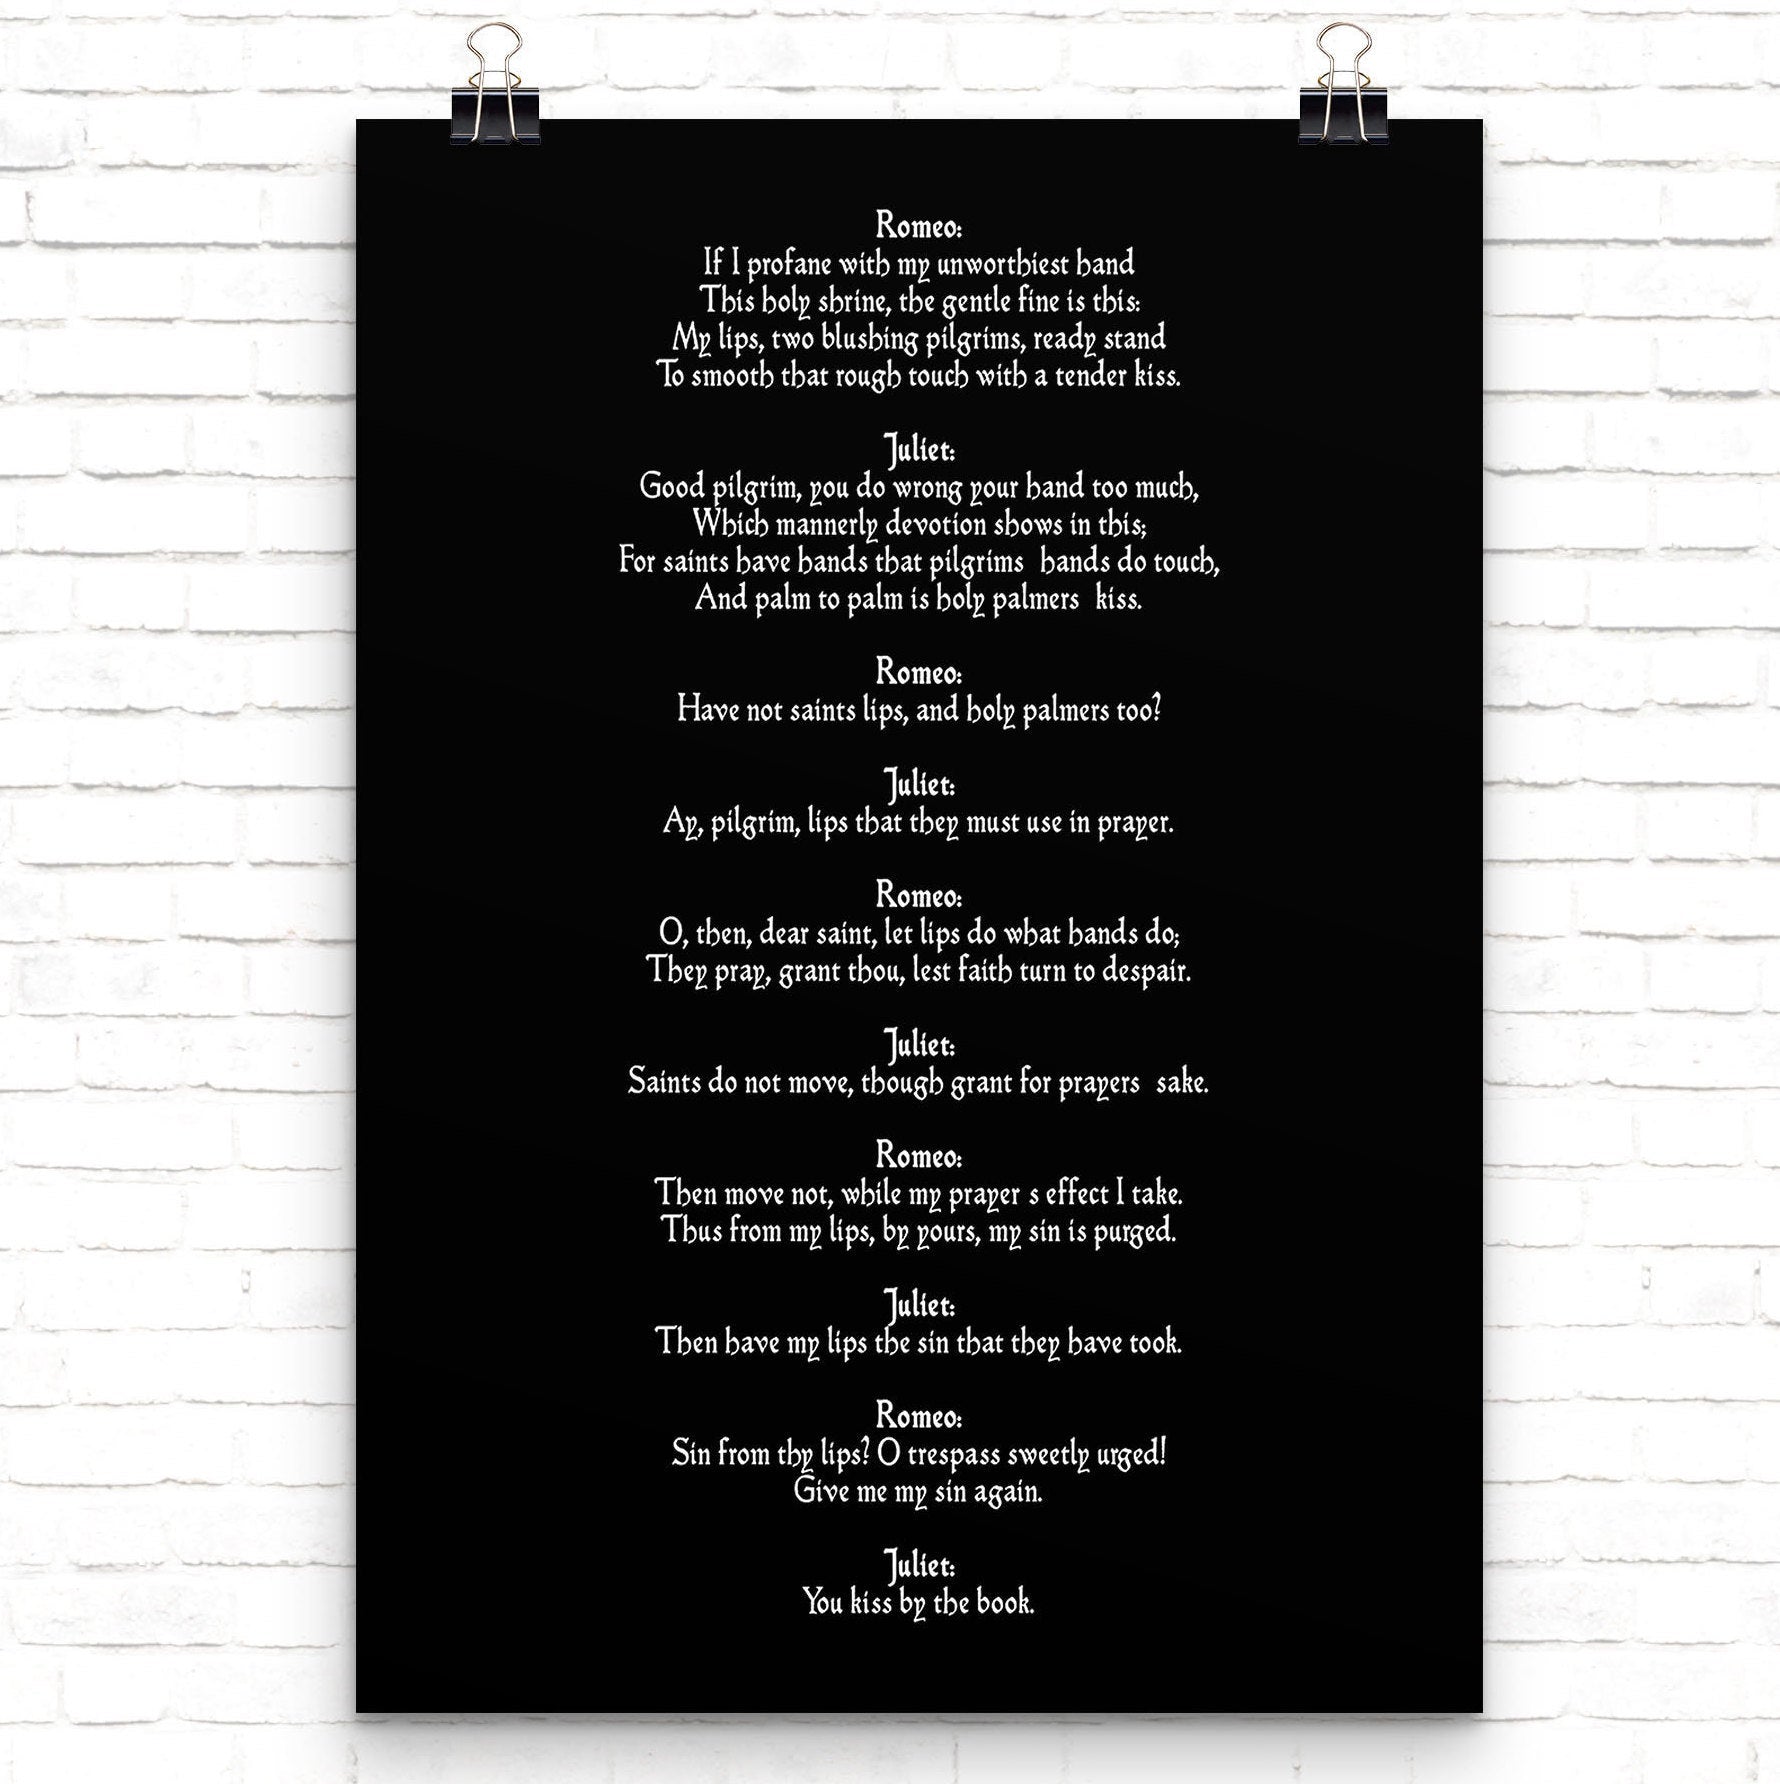 Romeo & Juliet Shakespeare Print, Black and White Art, Shakespeare Quote You Kiss By The Book Love Print, Romantic Wall Print Unframed - BookQuoteDecor